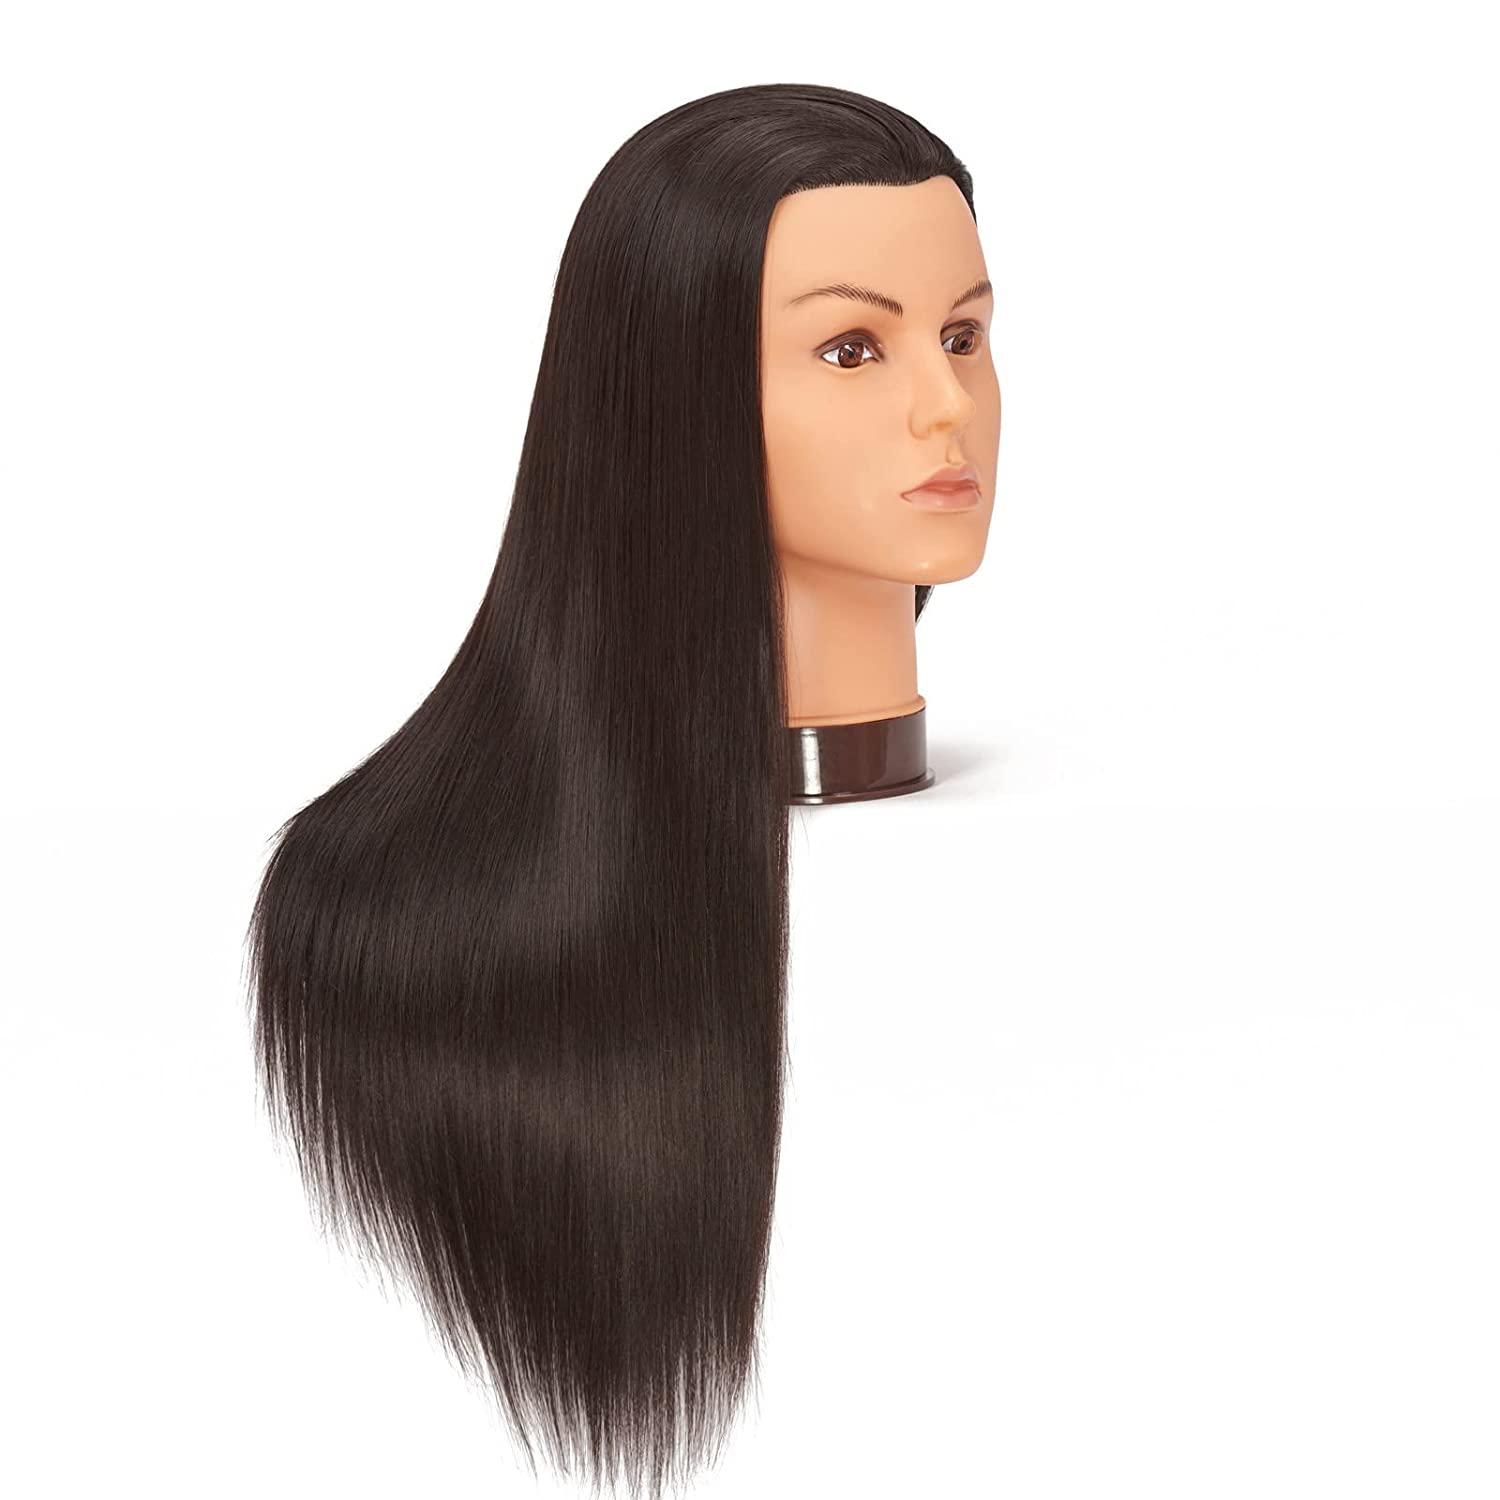  Hairlink 28-30'' Human Hair Mannequin Head With